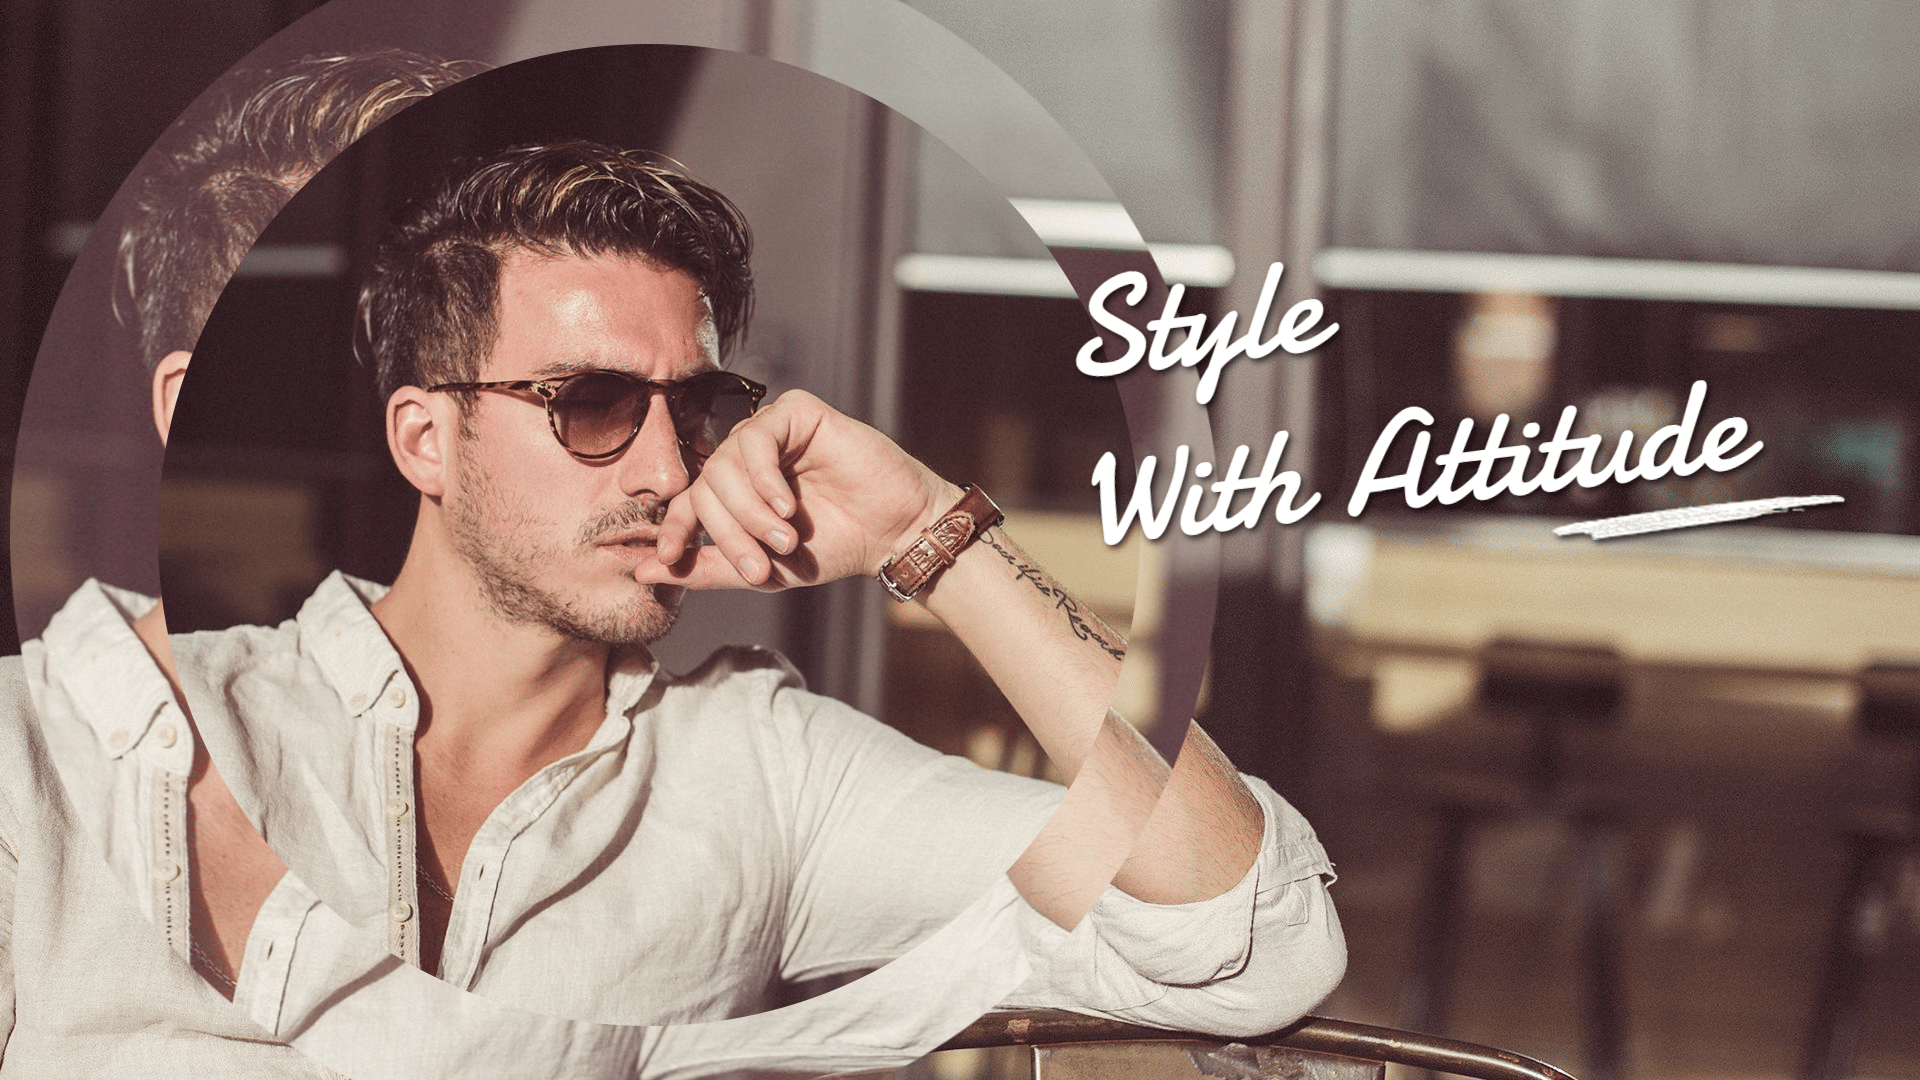 Gentleman Cool Quote Poster Simple Fashion Style Ecommerce Banner